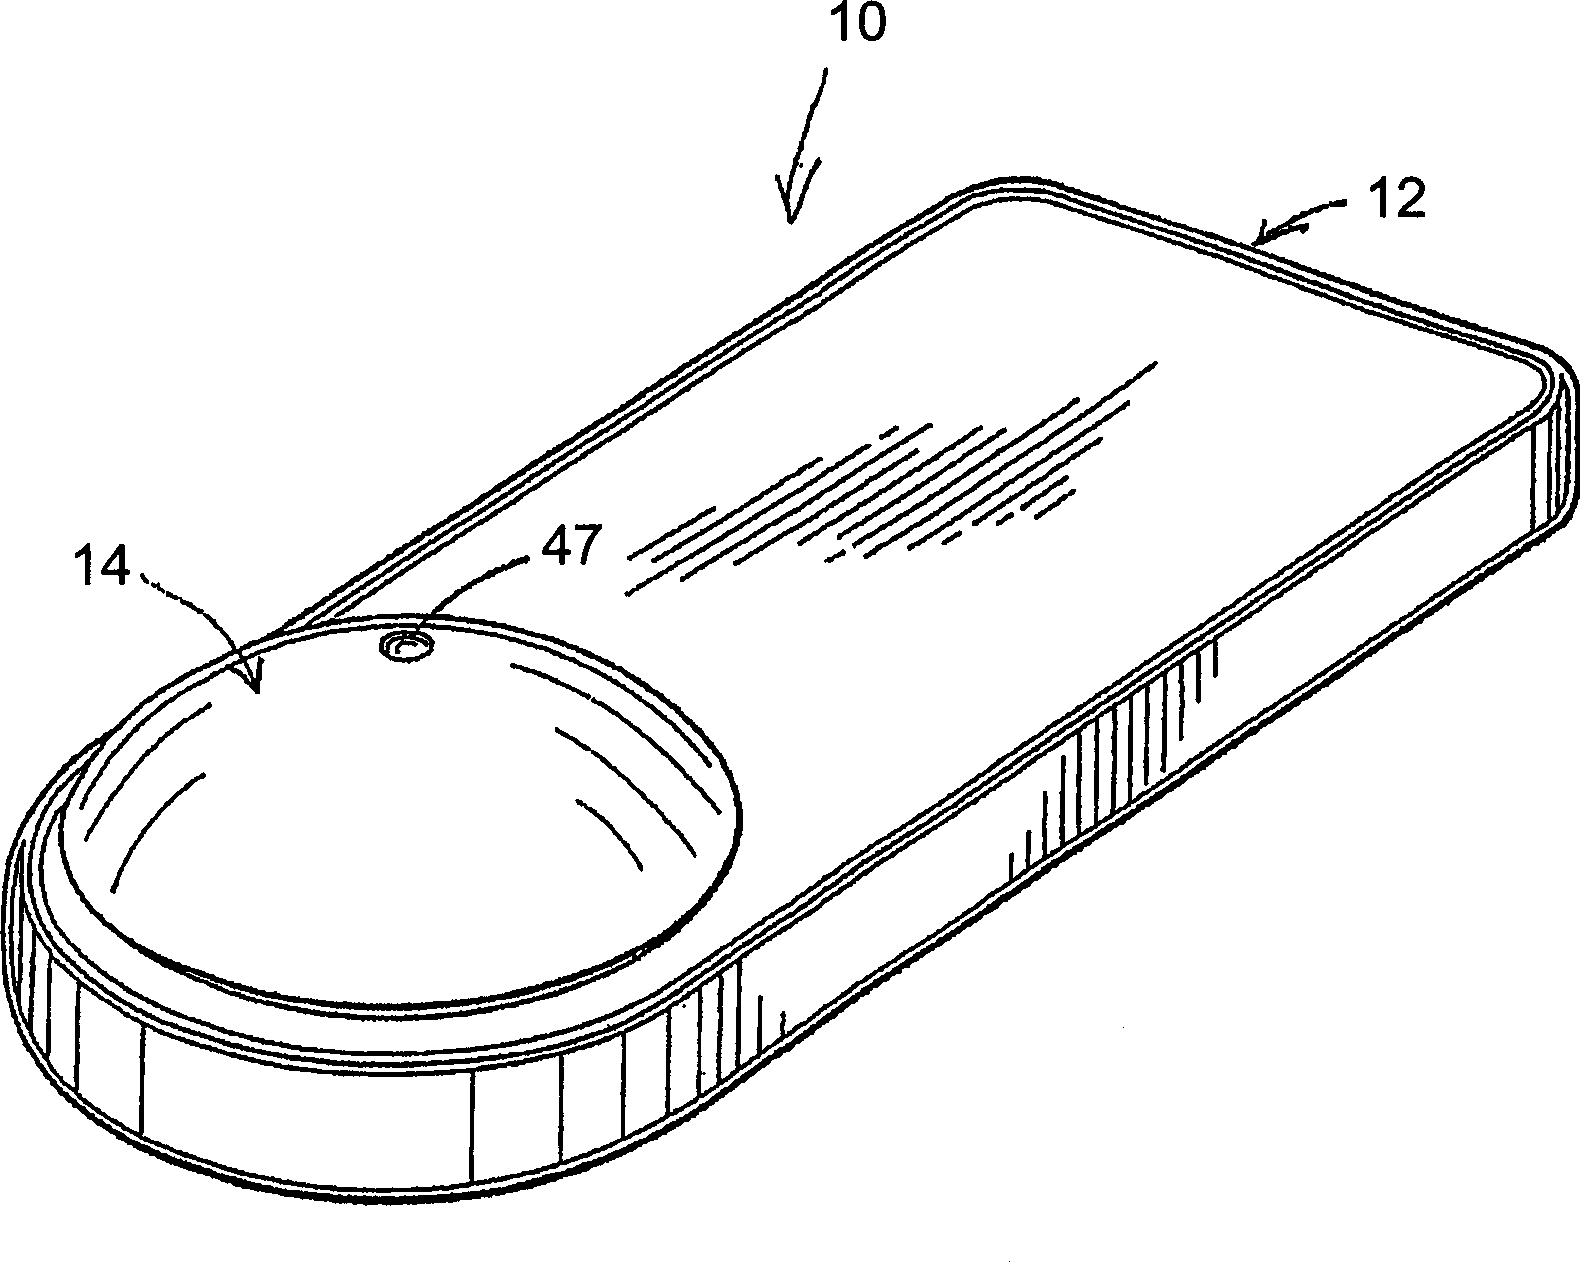 Security device for preventing unauthorized removal of merchandise